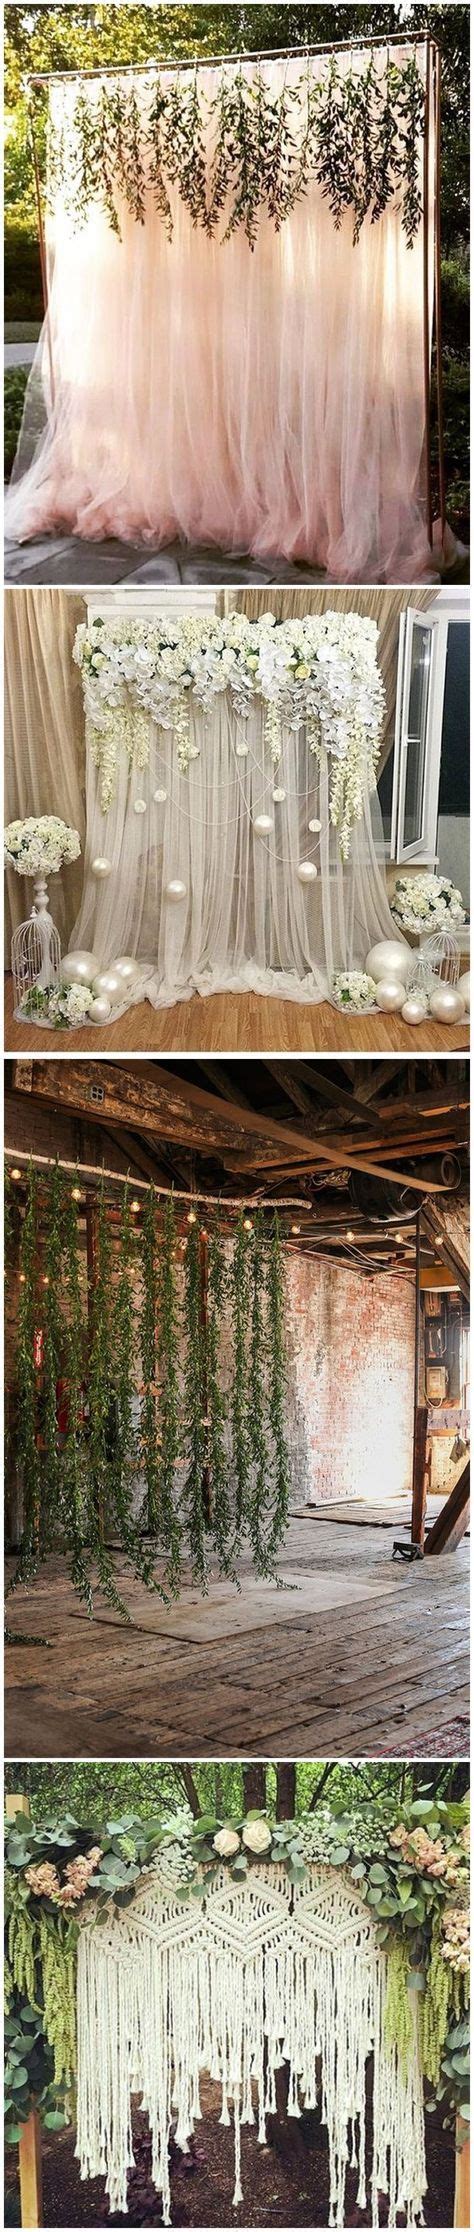 Rustic Backdrop Wedding Ideas 53 Wedding Ideas You Have Never Seen Before